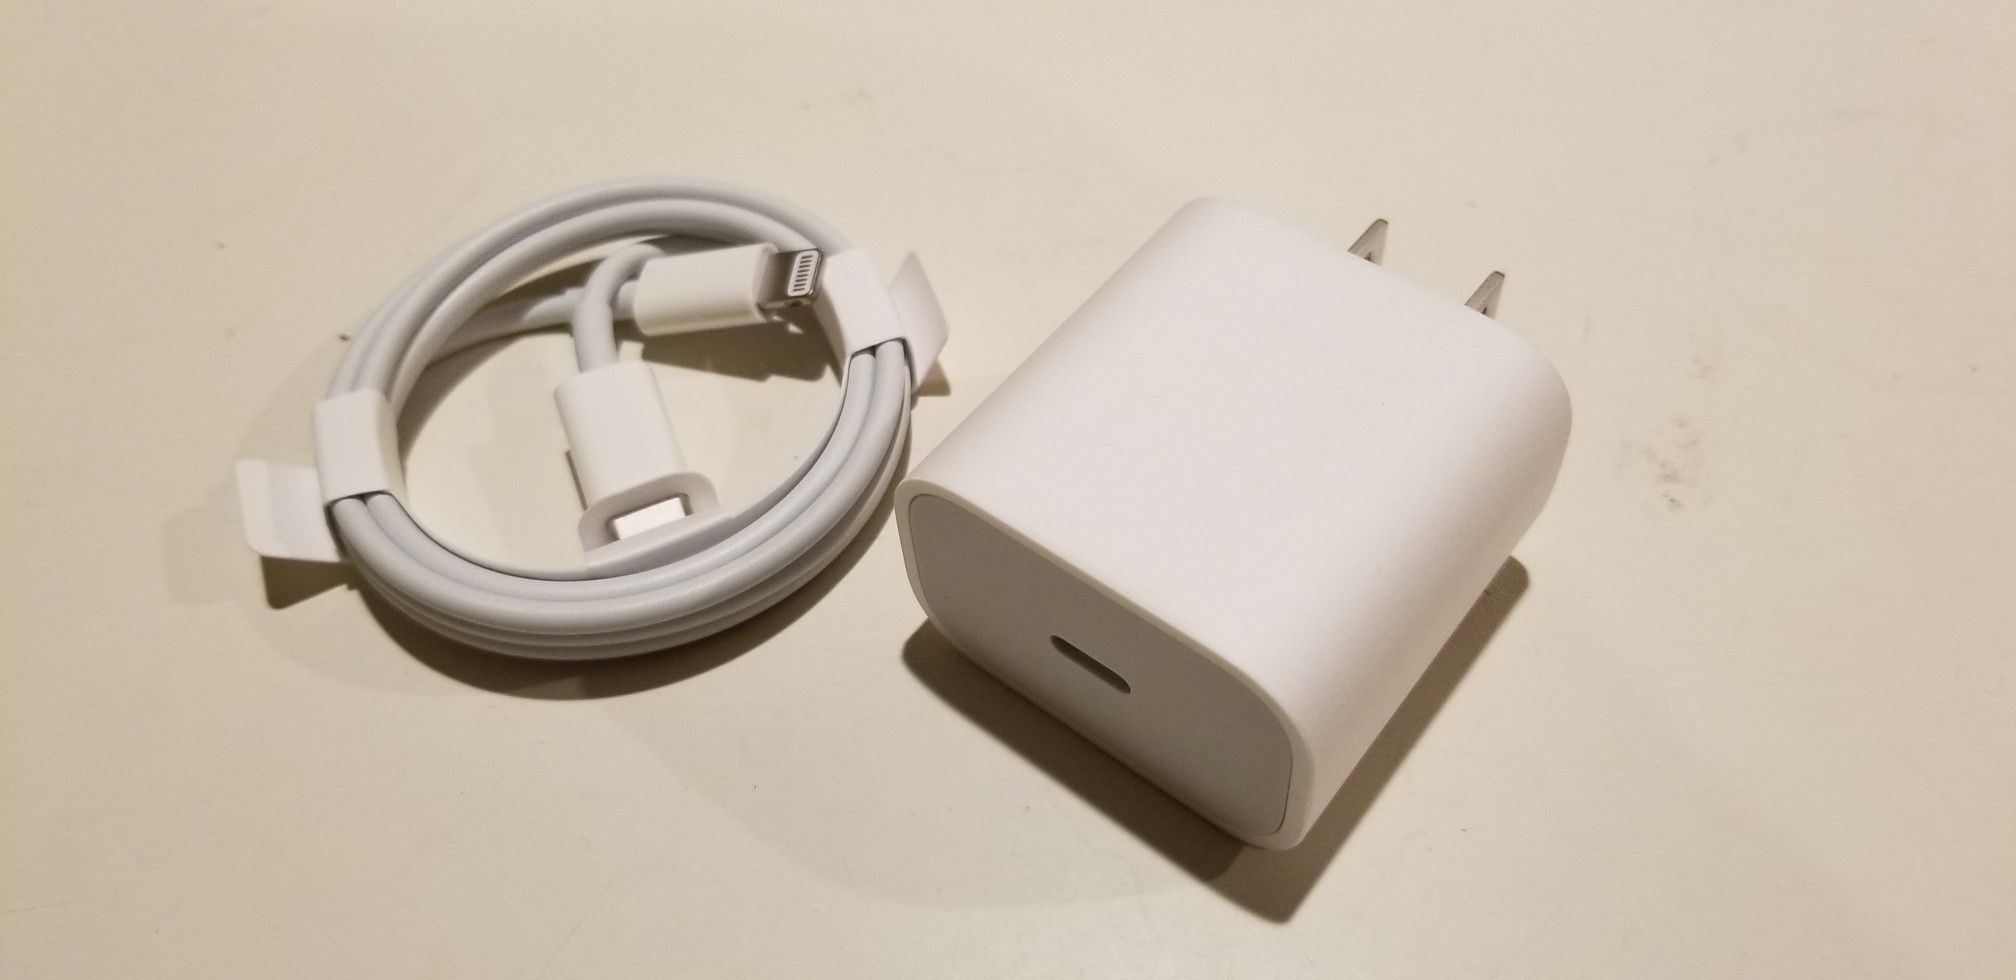 New Original Genuine Apple Iphone 11 Pro MAX / Pro Wall Charger & Lighting Cable